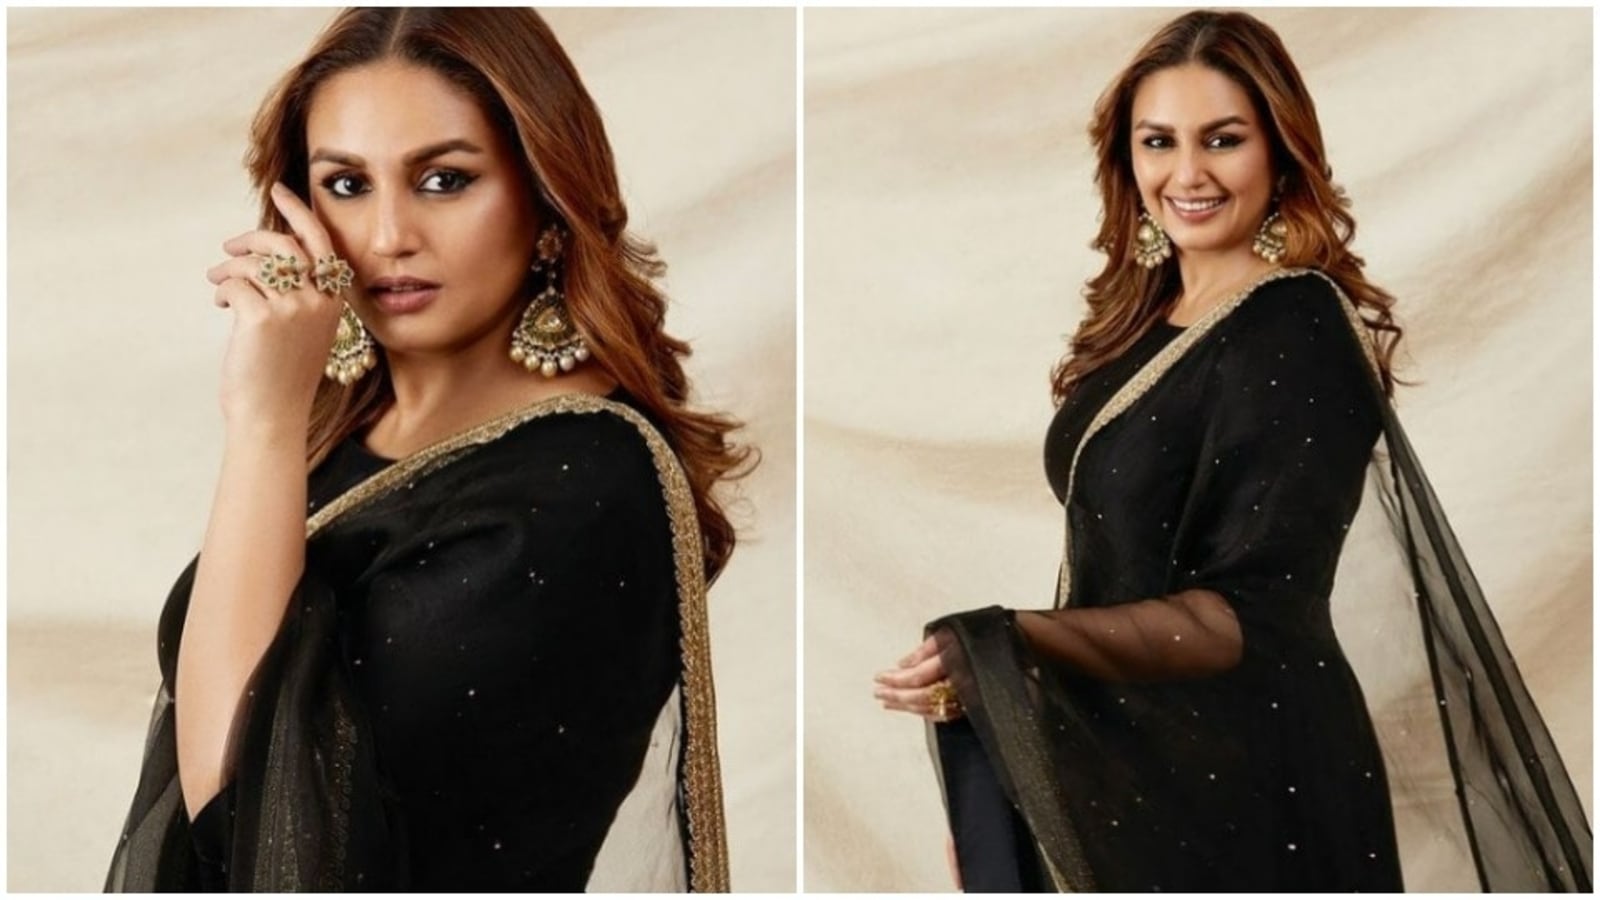 Huma Qureshi blends mystic and ethnic vibes in a black salwar suit | Hindustan Times